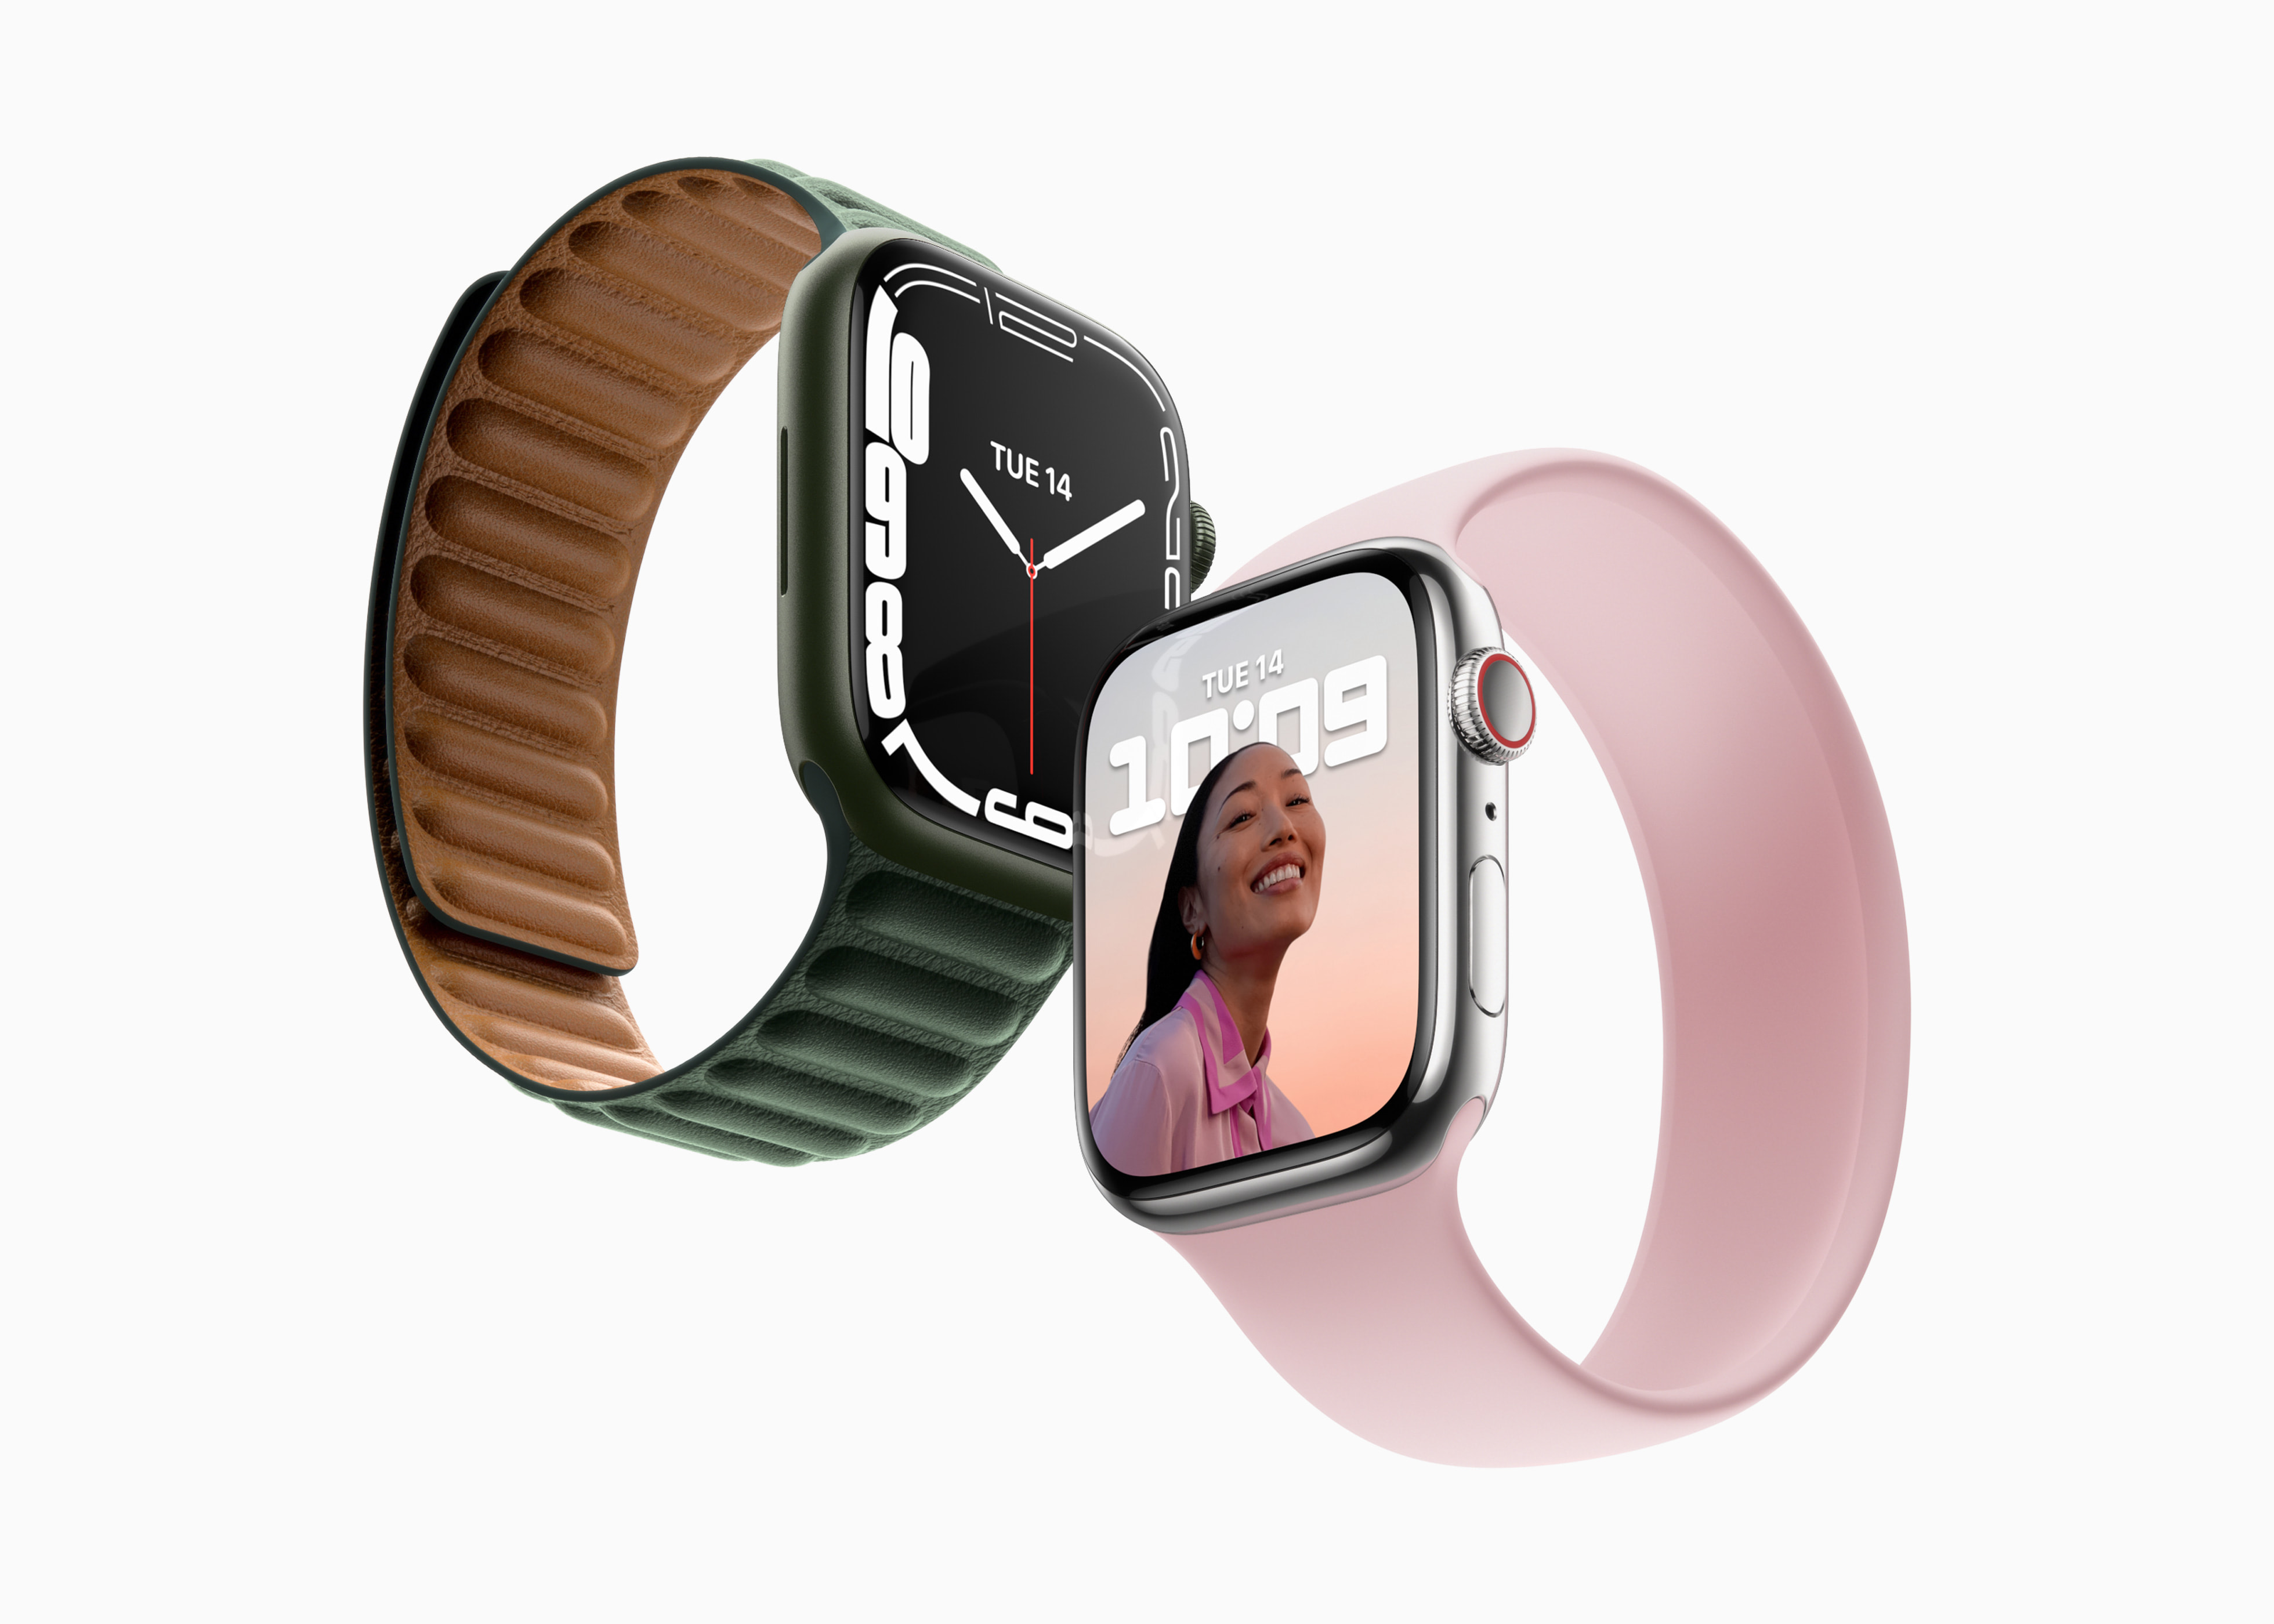 Do You Need a Data Plan for Your Apple Watch? 7